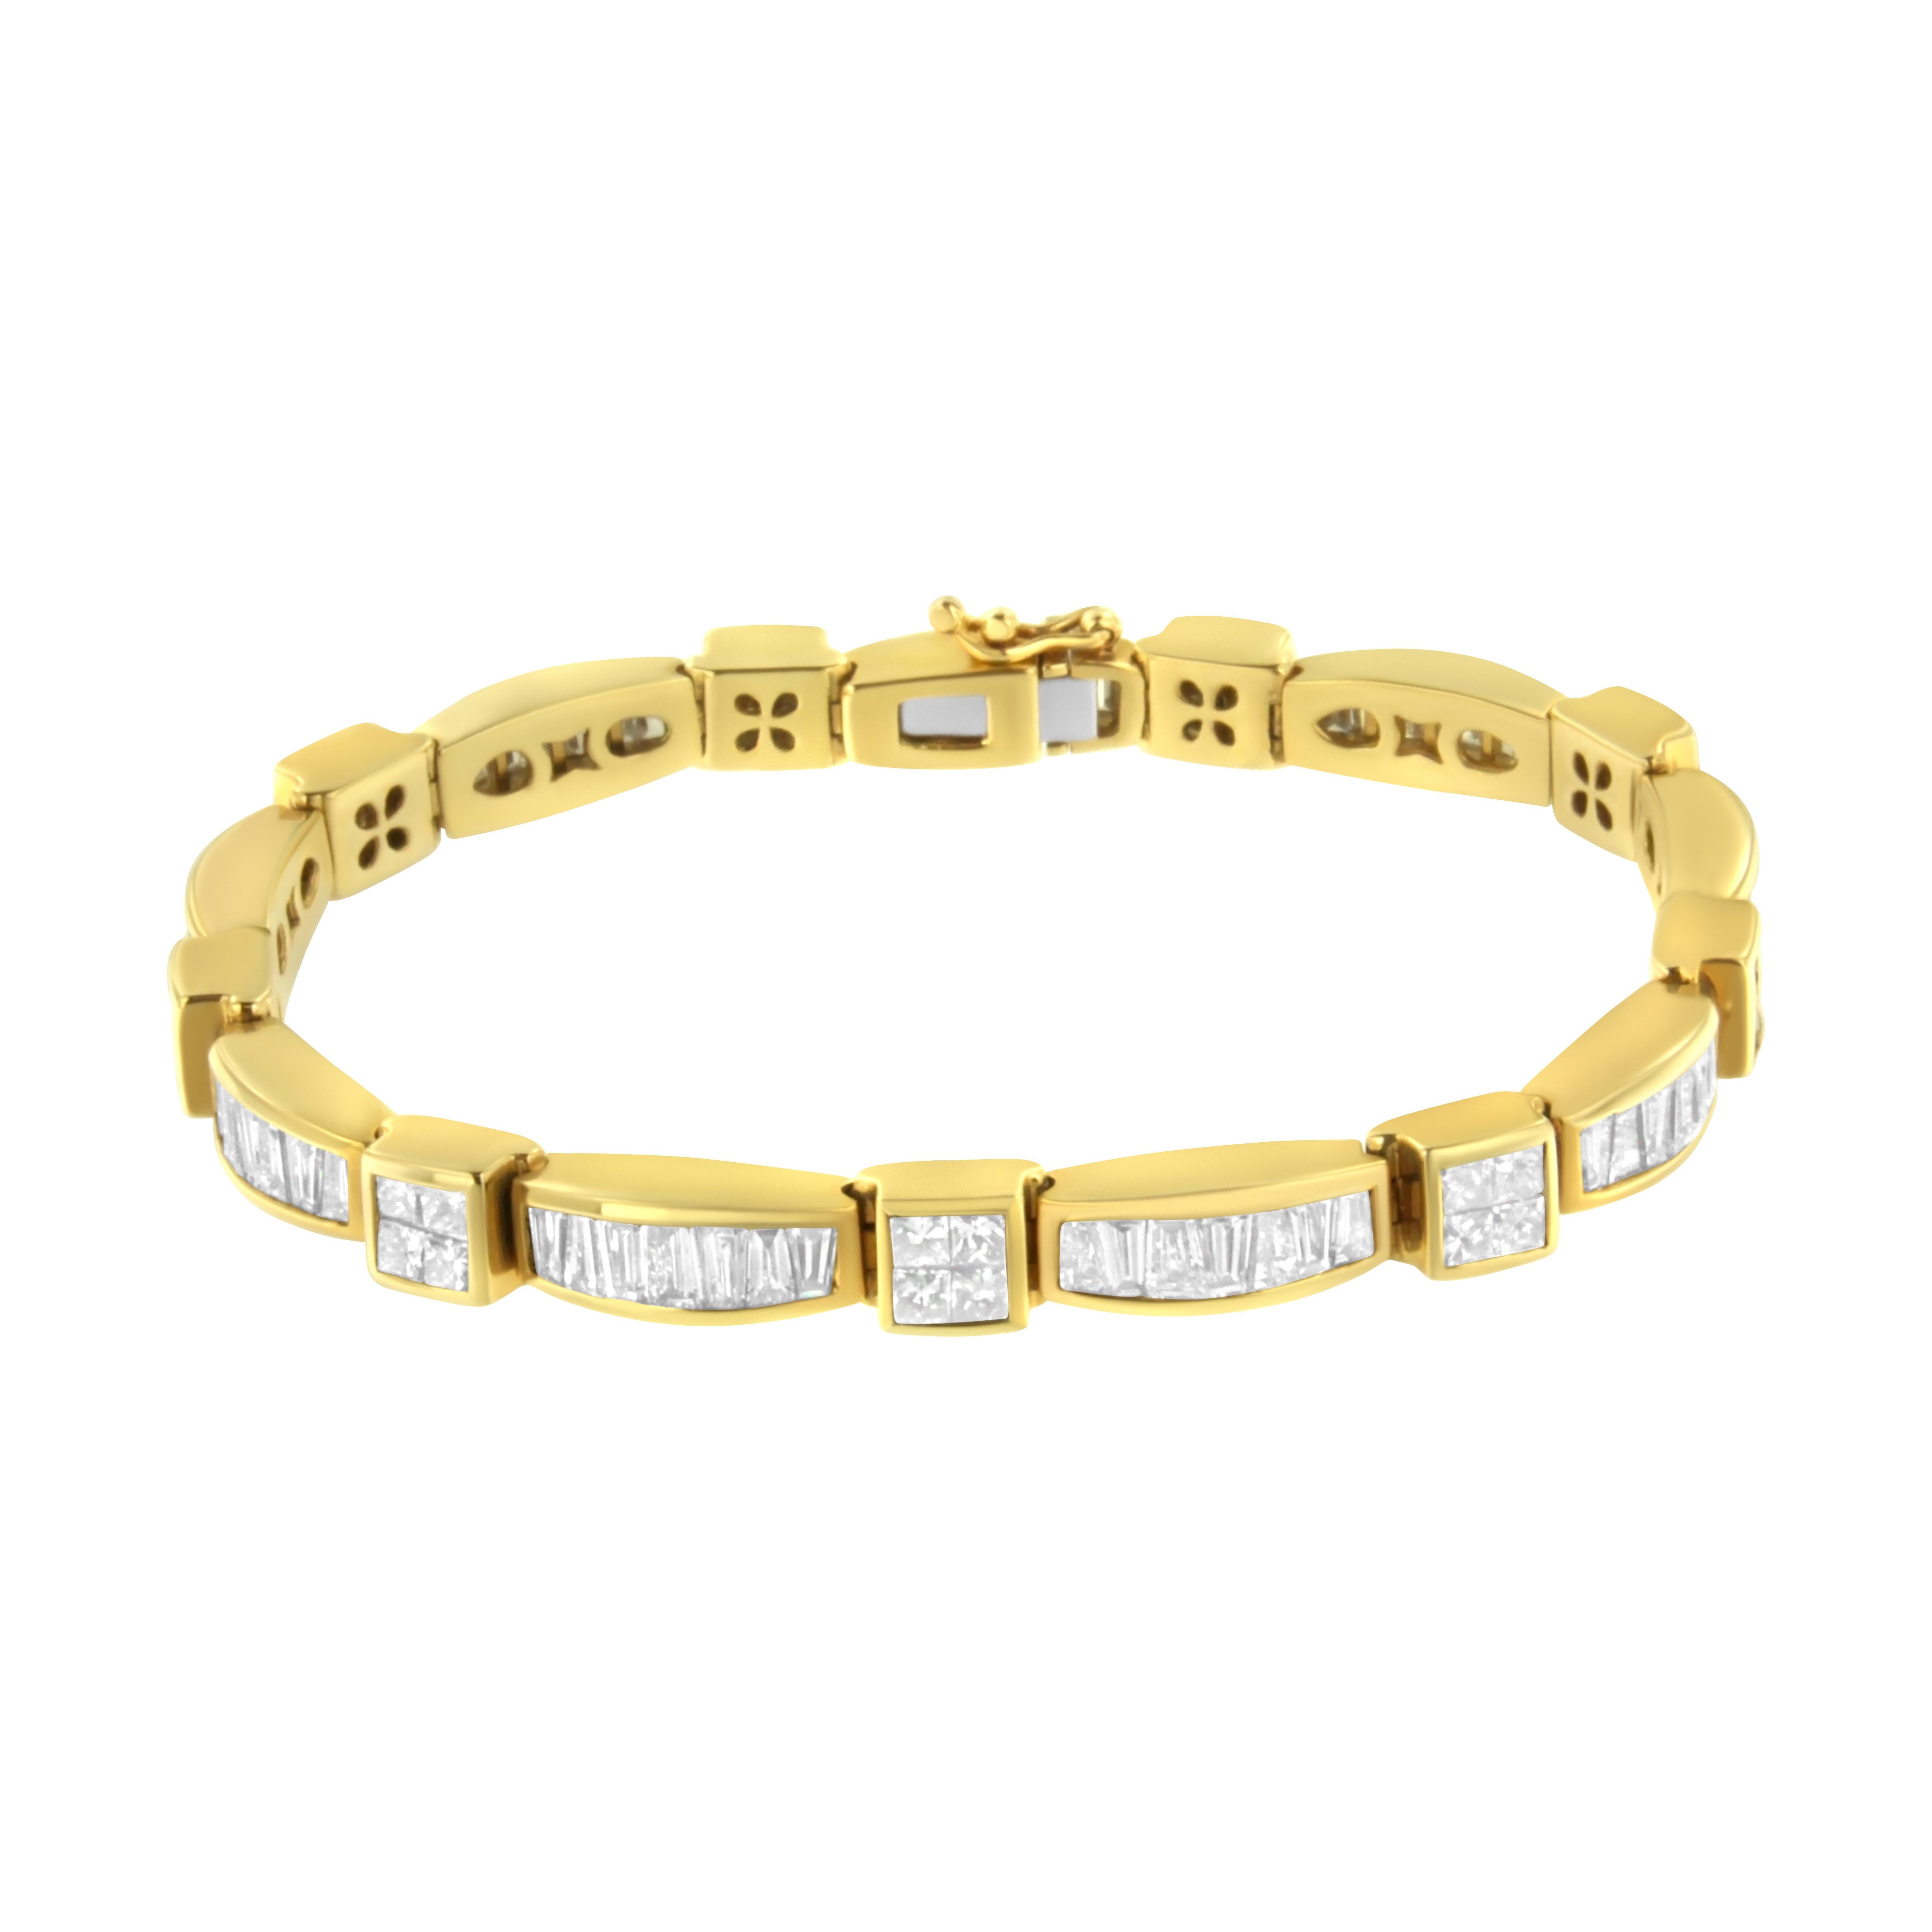 A glossy 14 karat yellow gold band is the perfect backdrop for over 7 carats of princess cut and baguette cut diamonds, linked together in two distinctive geometric shapes. This piece is equally as stunning when worn for a special occasion or every